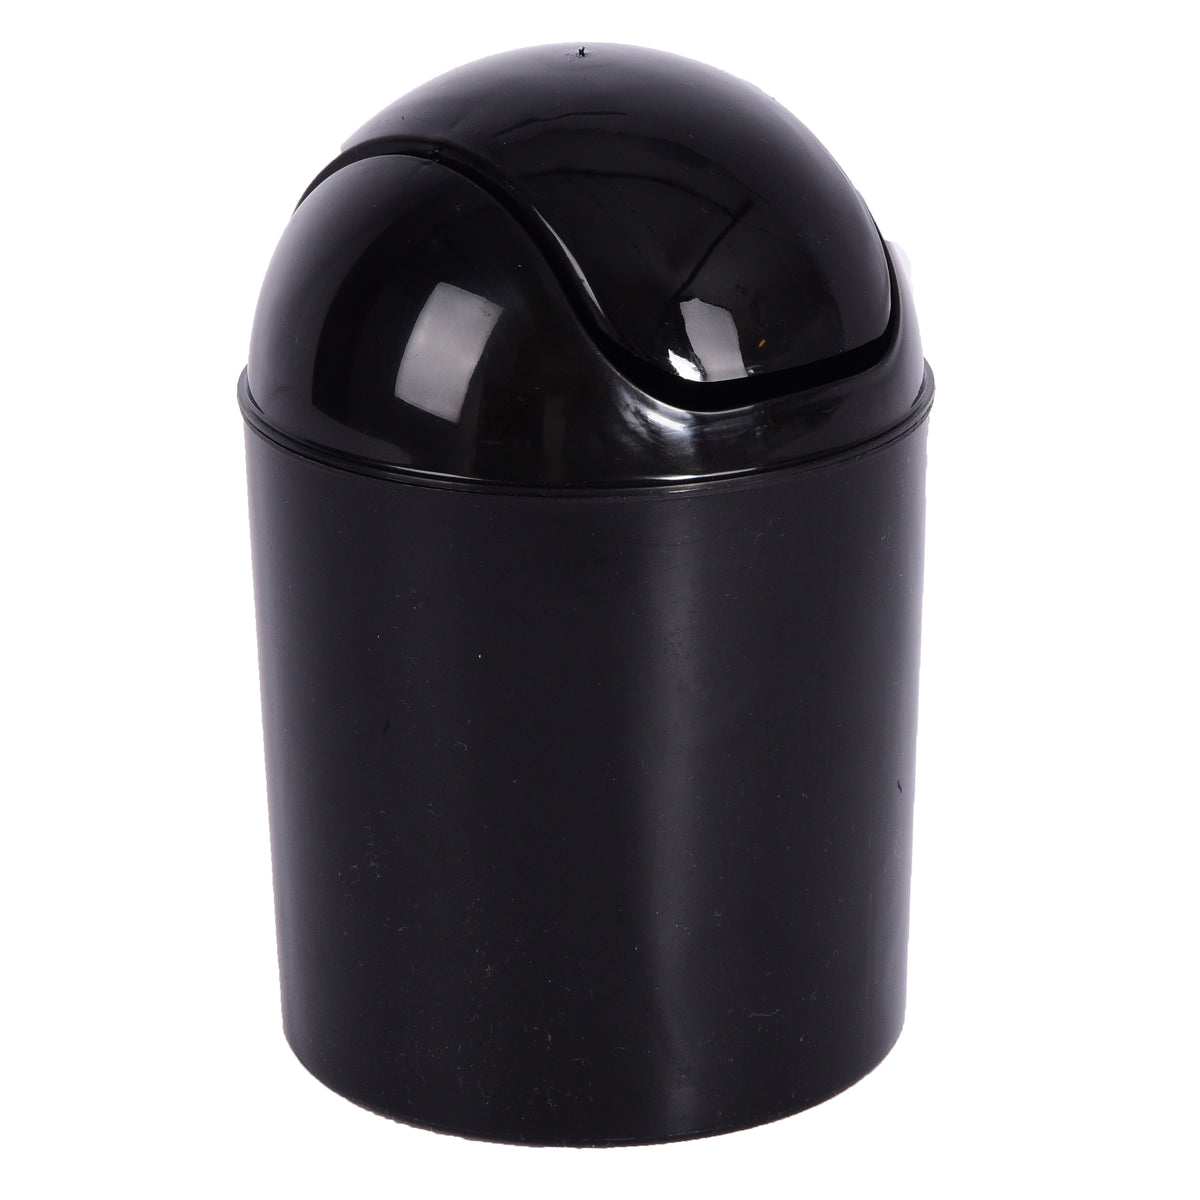 Dustbin with swing lid - BlackCapacity: 1.7 liters.